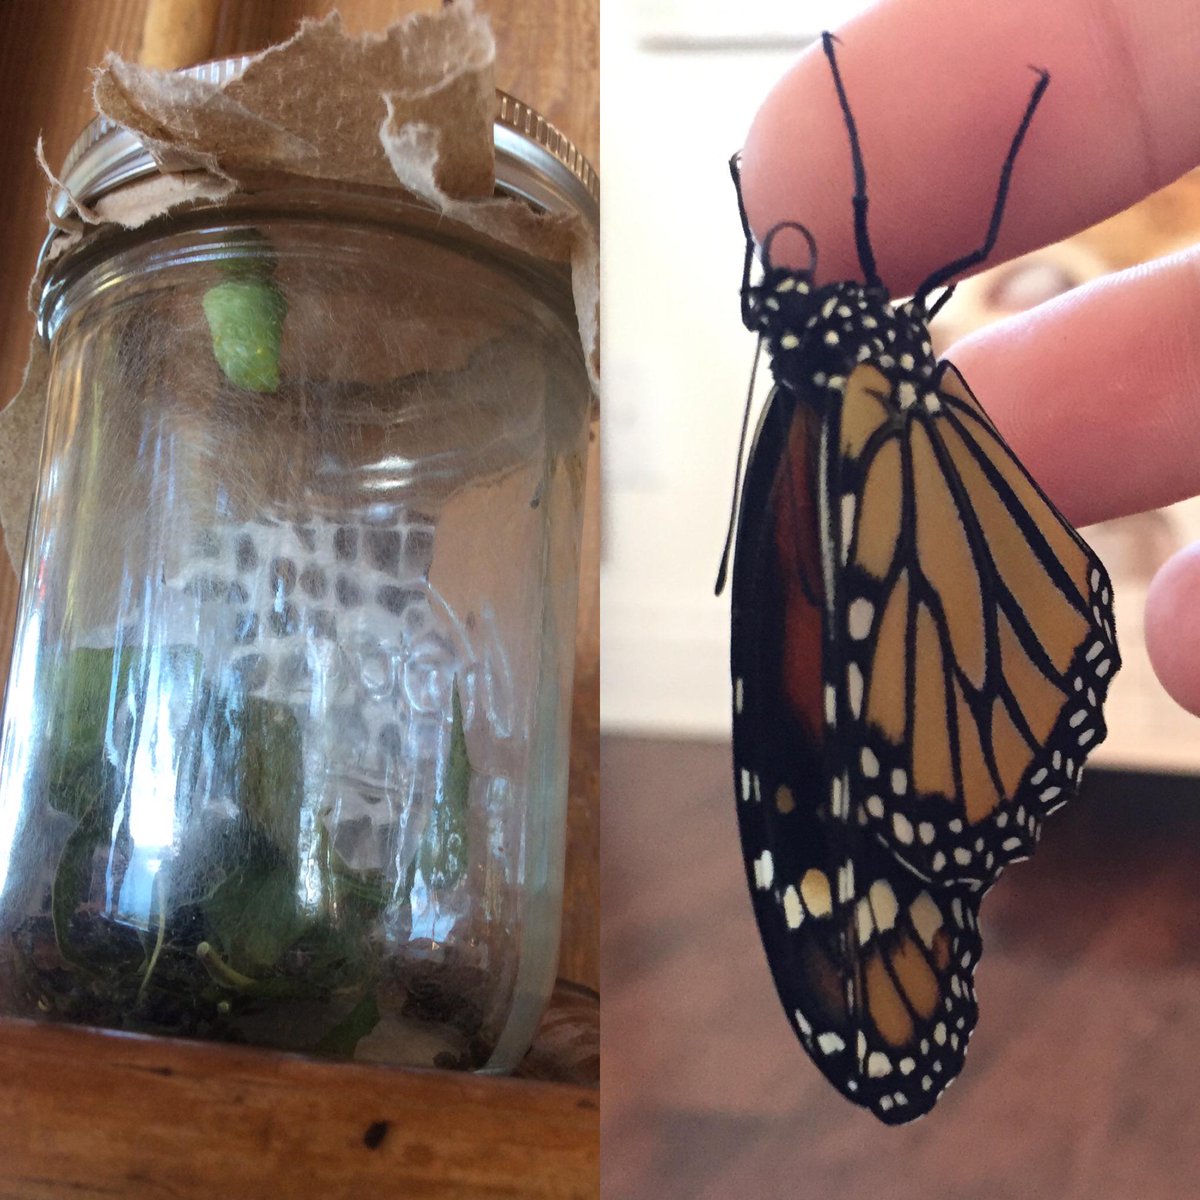 a gift from my time at esalen
caterpillar, chrysalis, monarch.
#metamorphosis #liberation #breathtaking #monarch http://t.co/meAUAMf5ZT